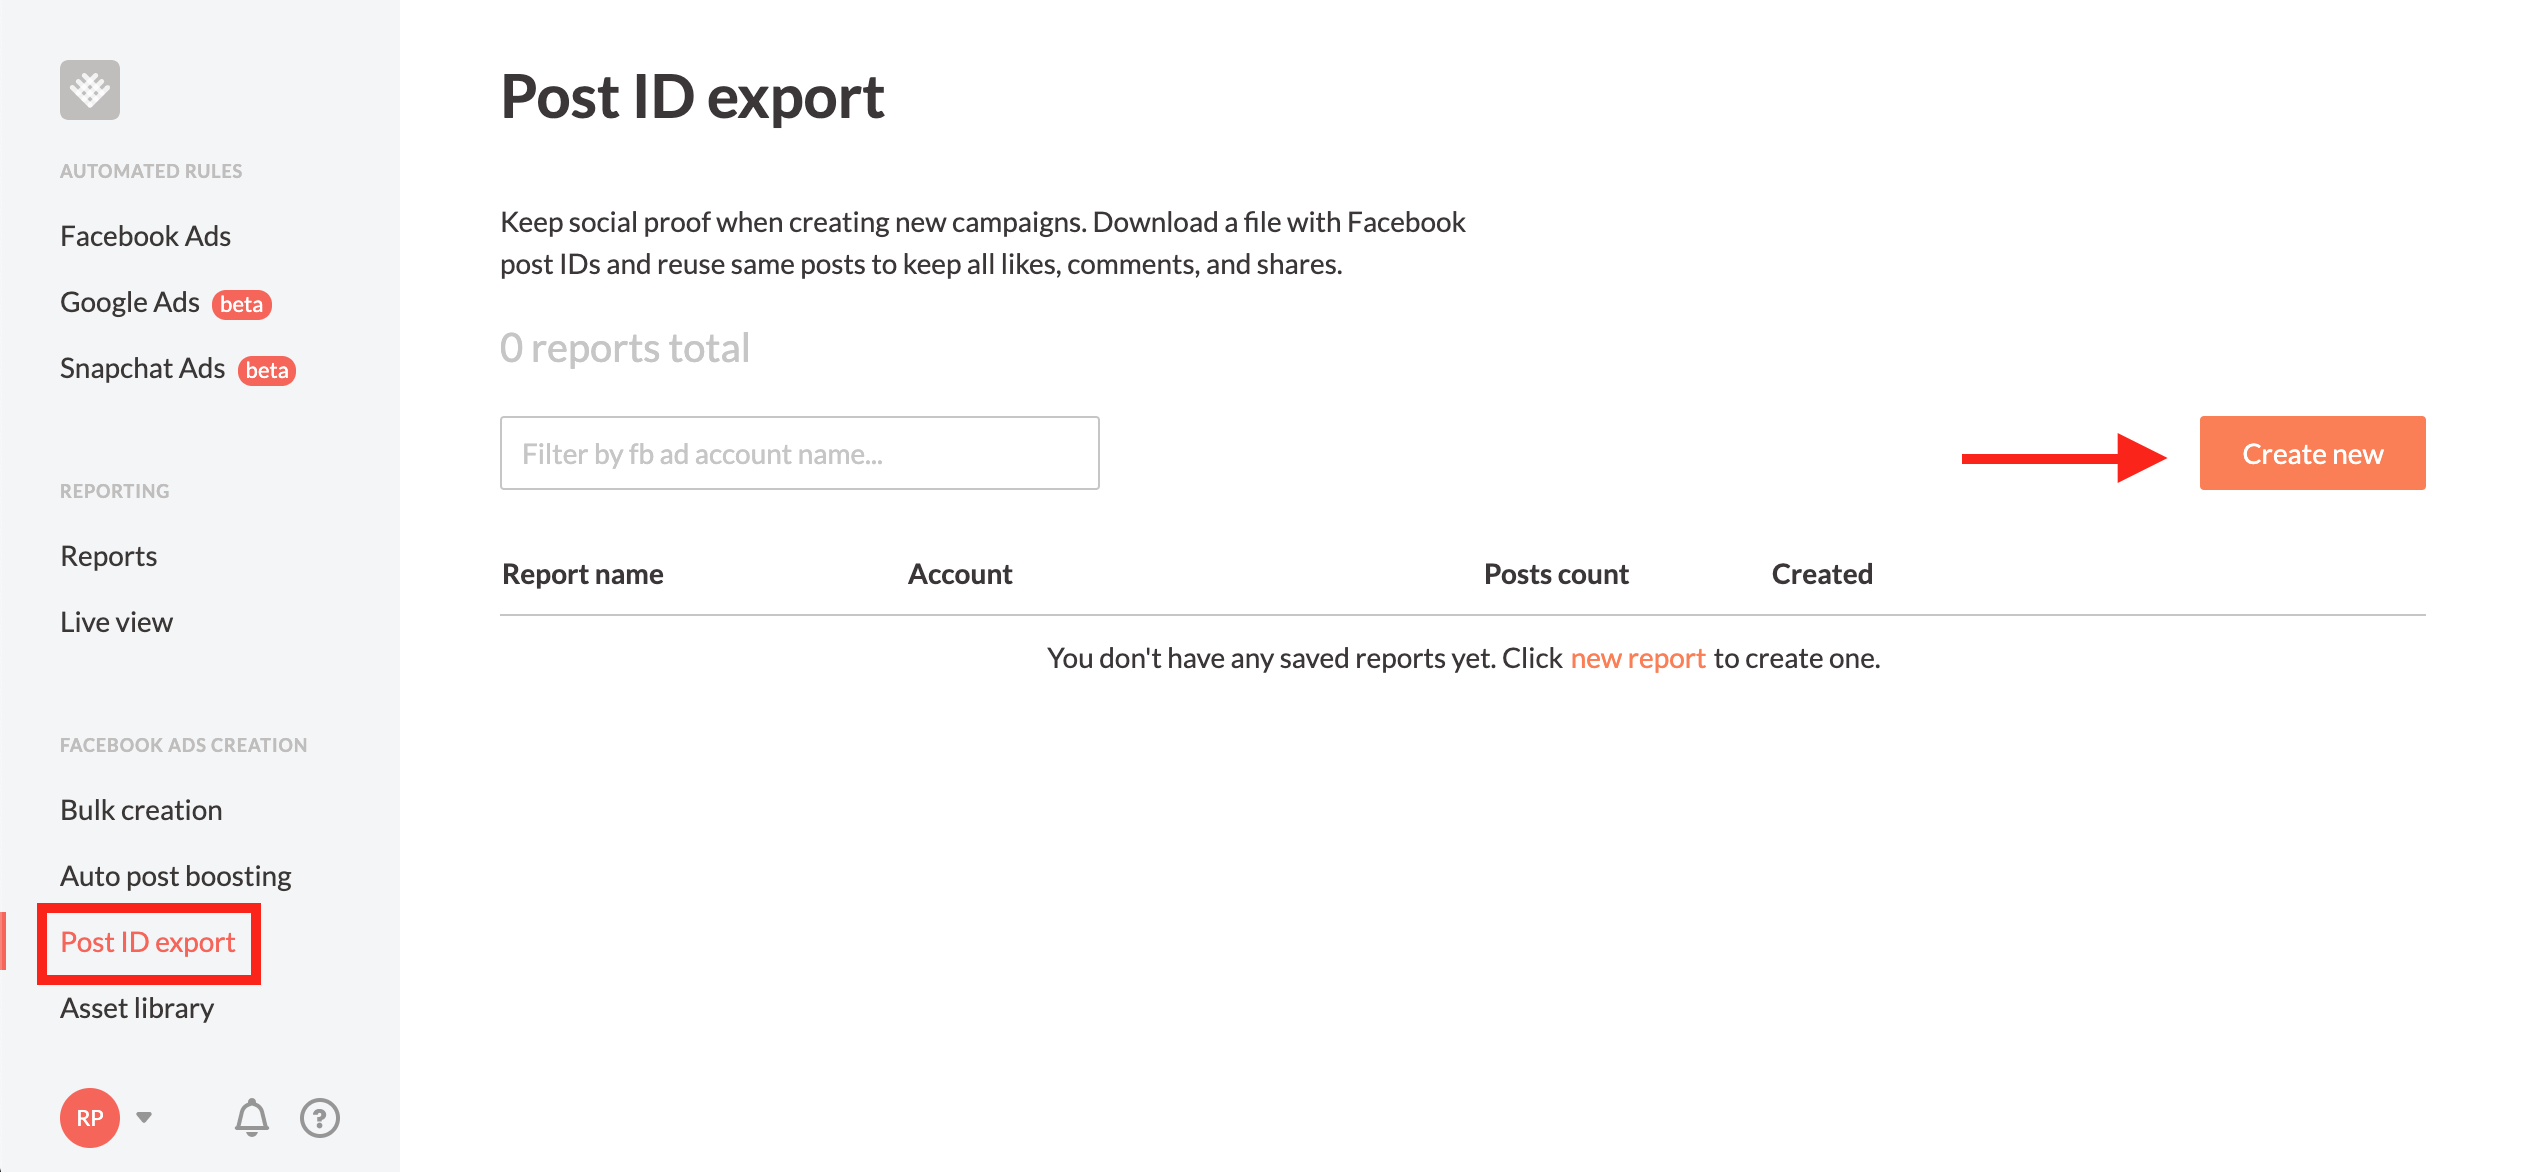 How to get to post ID export in Revealbot